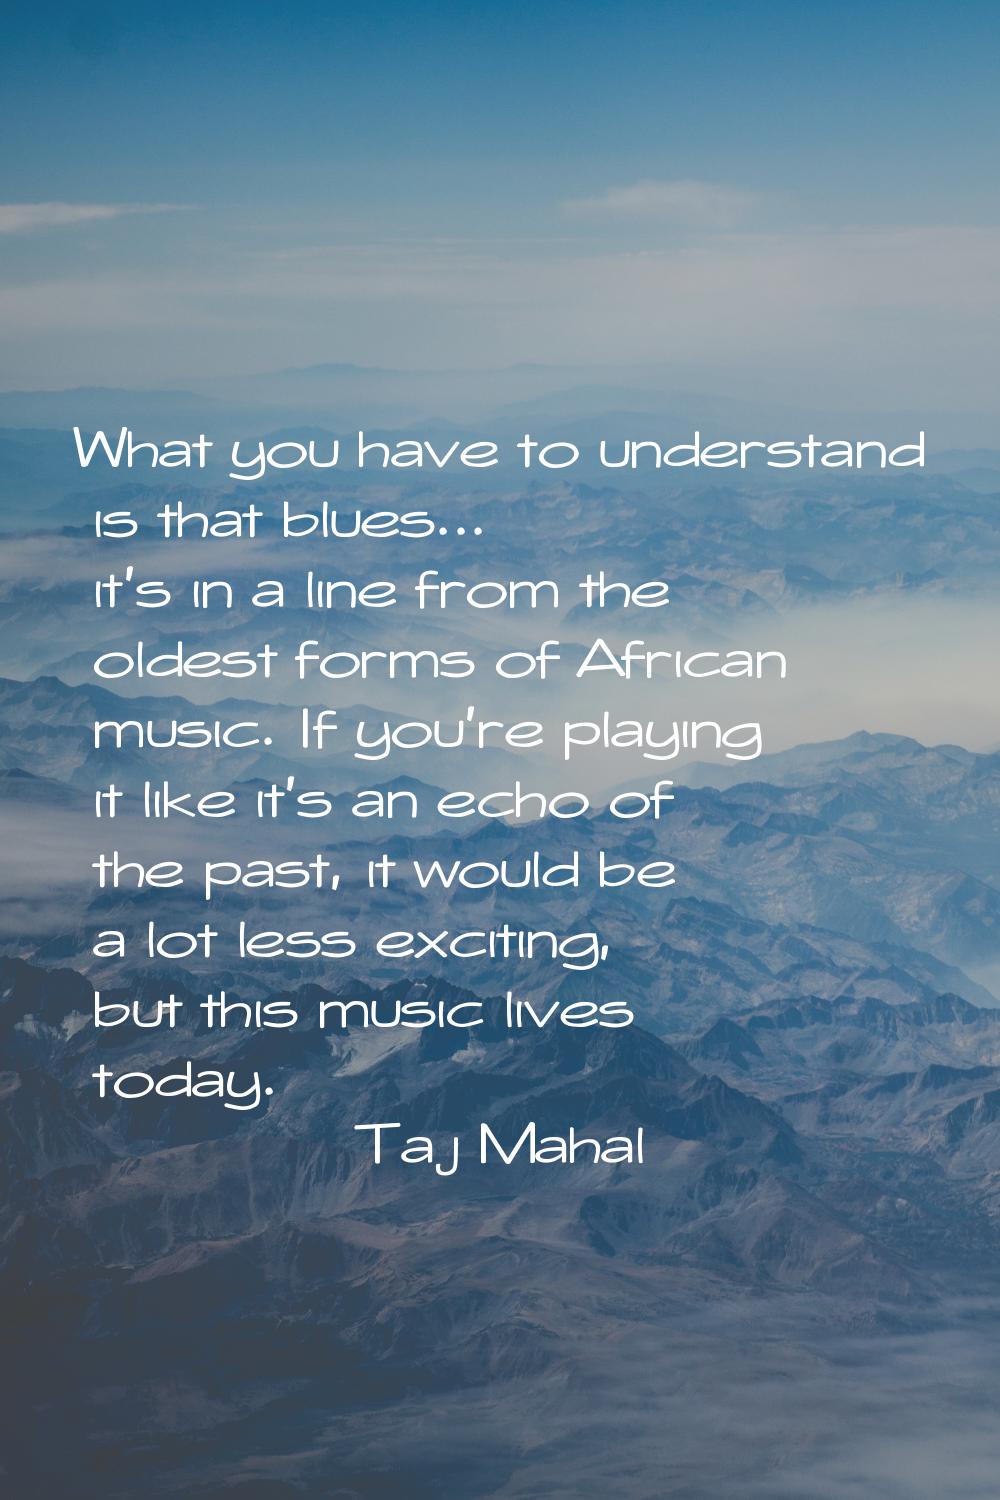 What you have to understand is that blues... it's in a line from the oldest forms of African music.